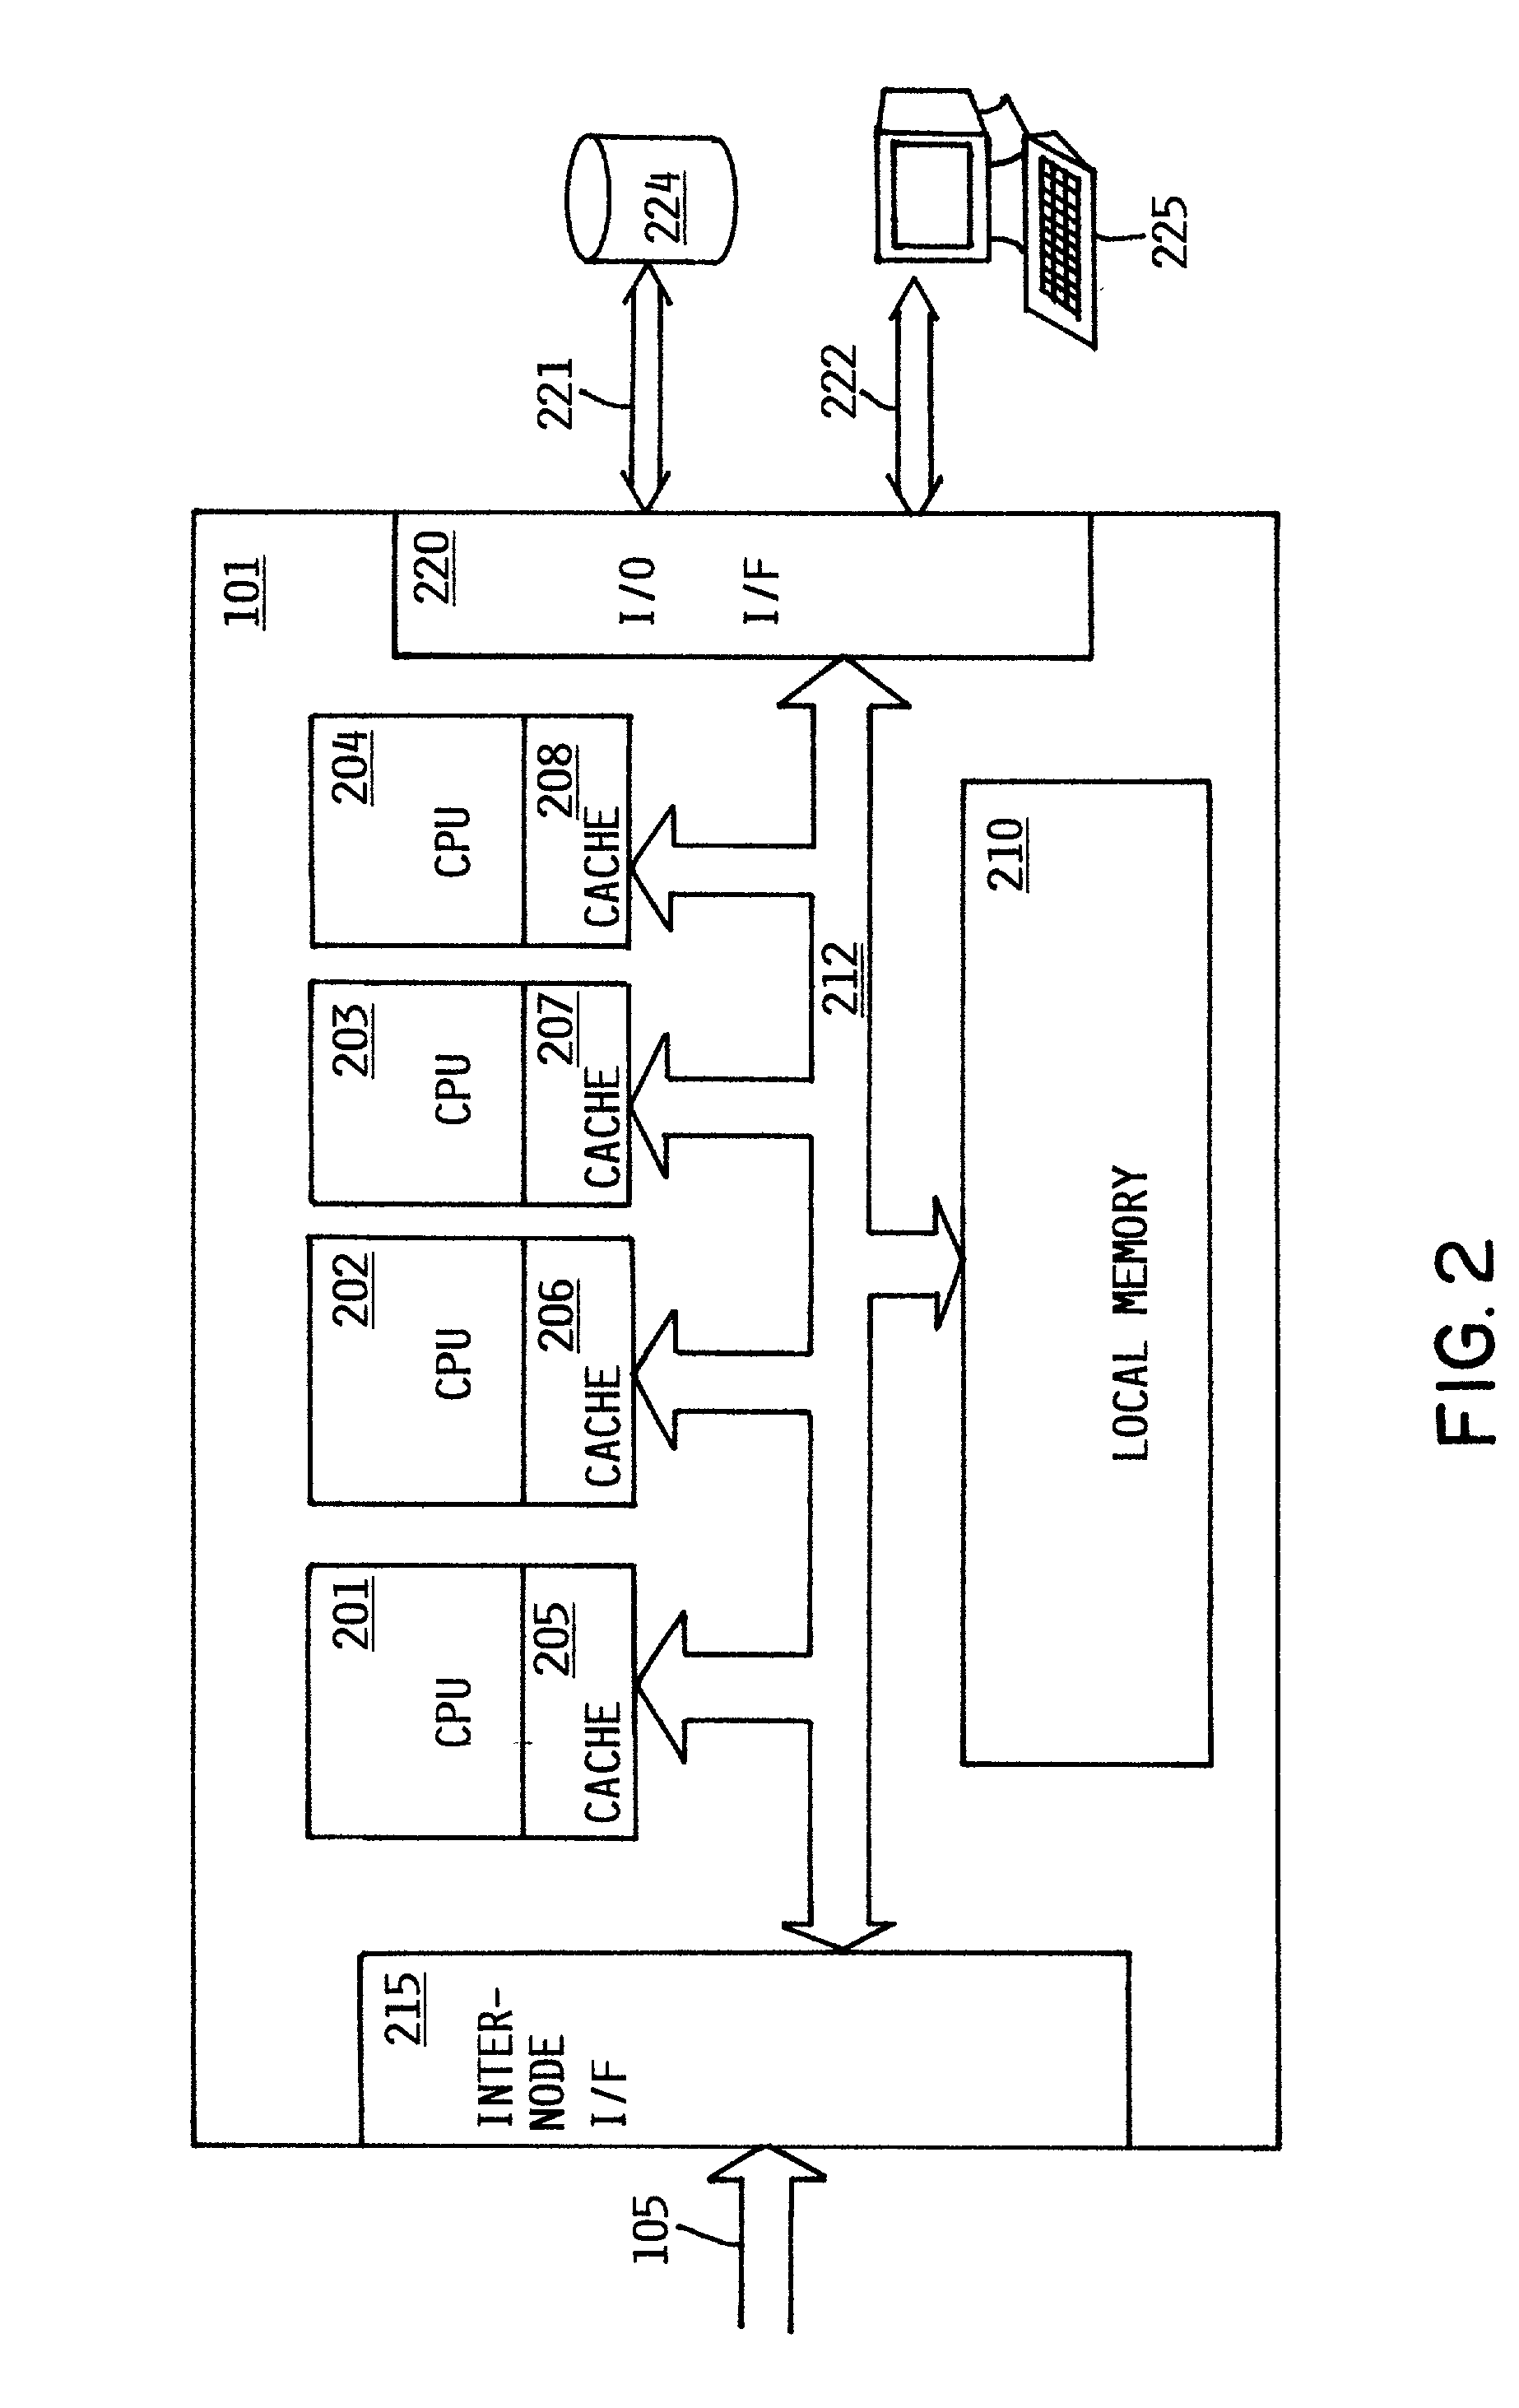 Method and apparatus for dispatching tasks in a non-uniform memory access (NUMA) computer system